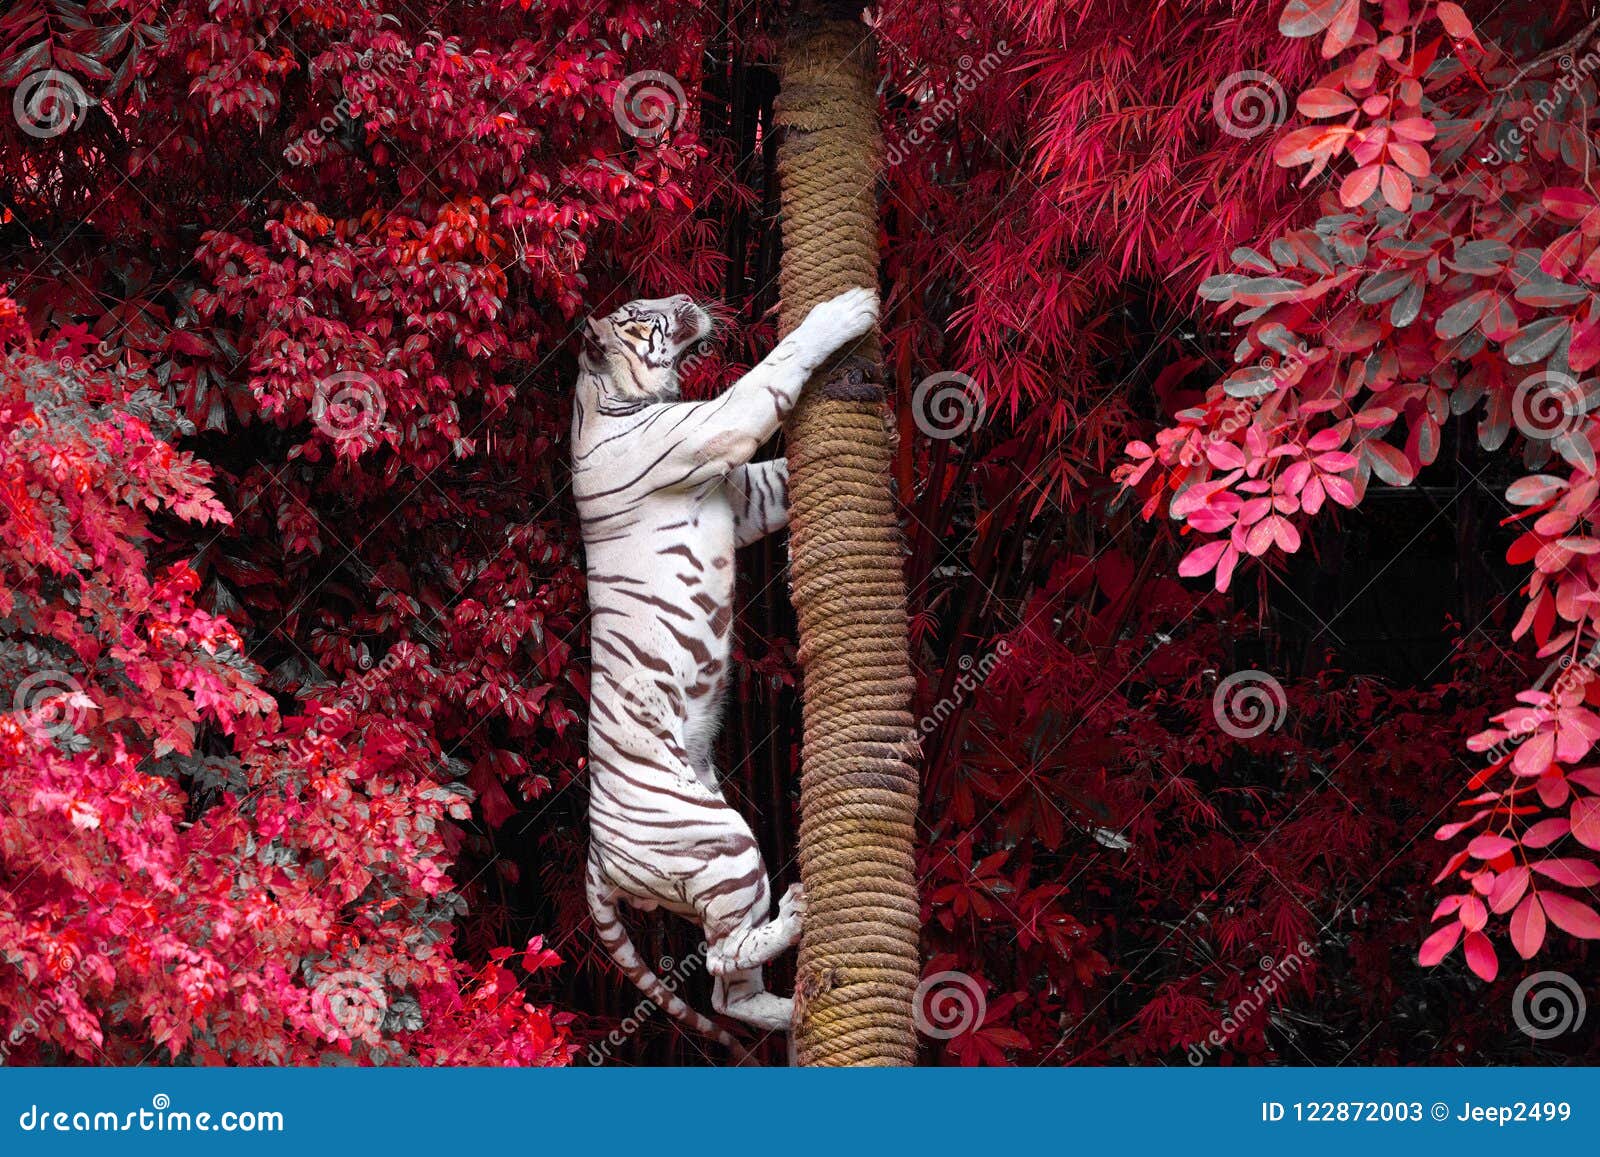 white tigers are climbing trees in the wild nature.